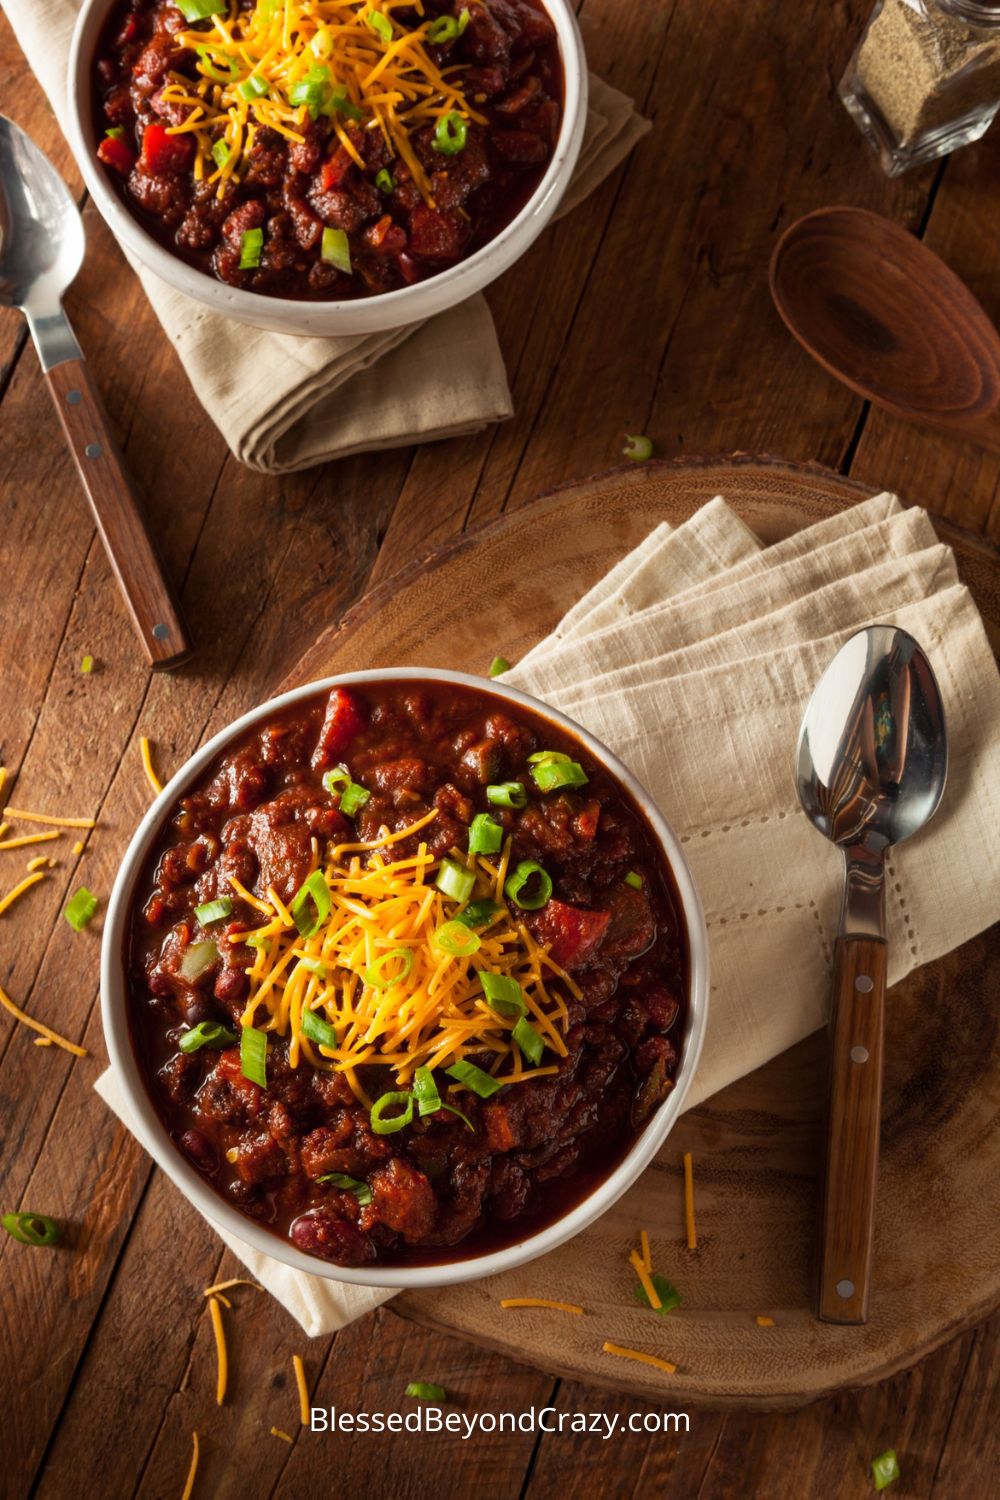 How to Make Smoked Chili - Blessed Beyond Crazy